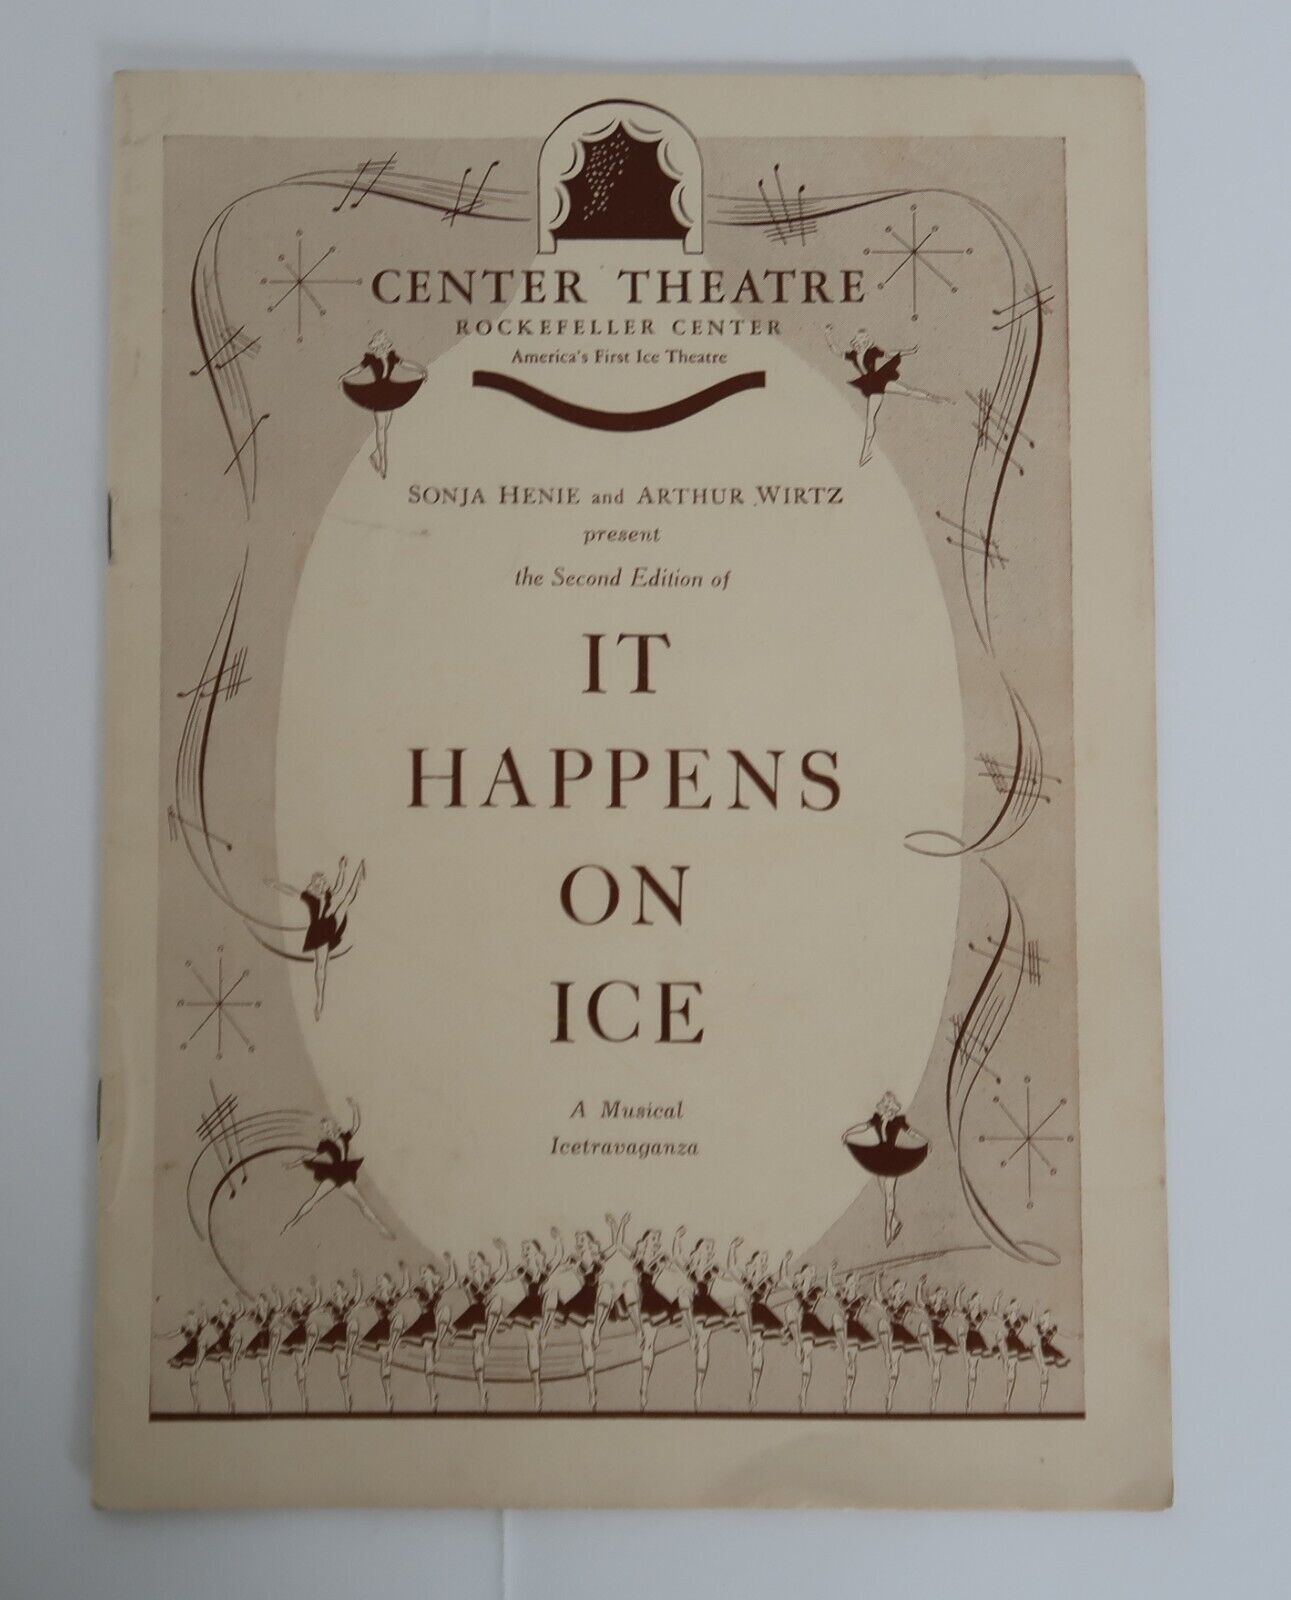 Primary image for Vintage 1941 Playbill Center Theatre Rockefeller Center "It Happens on Ice"